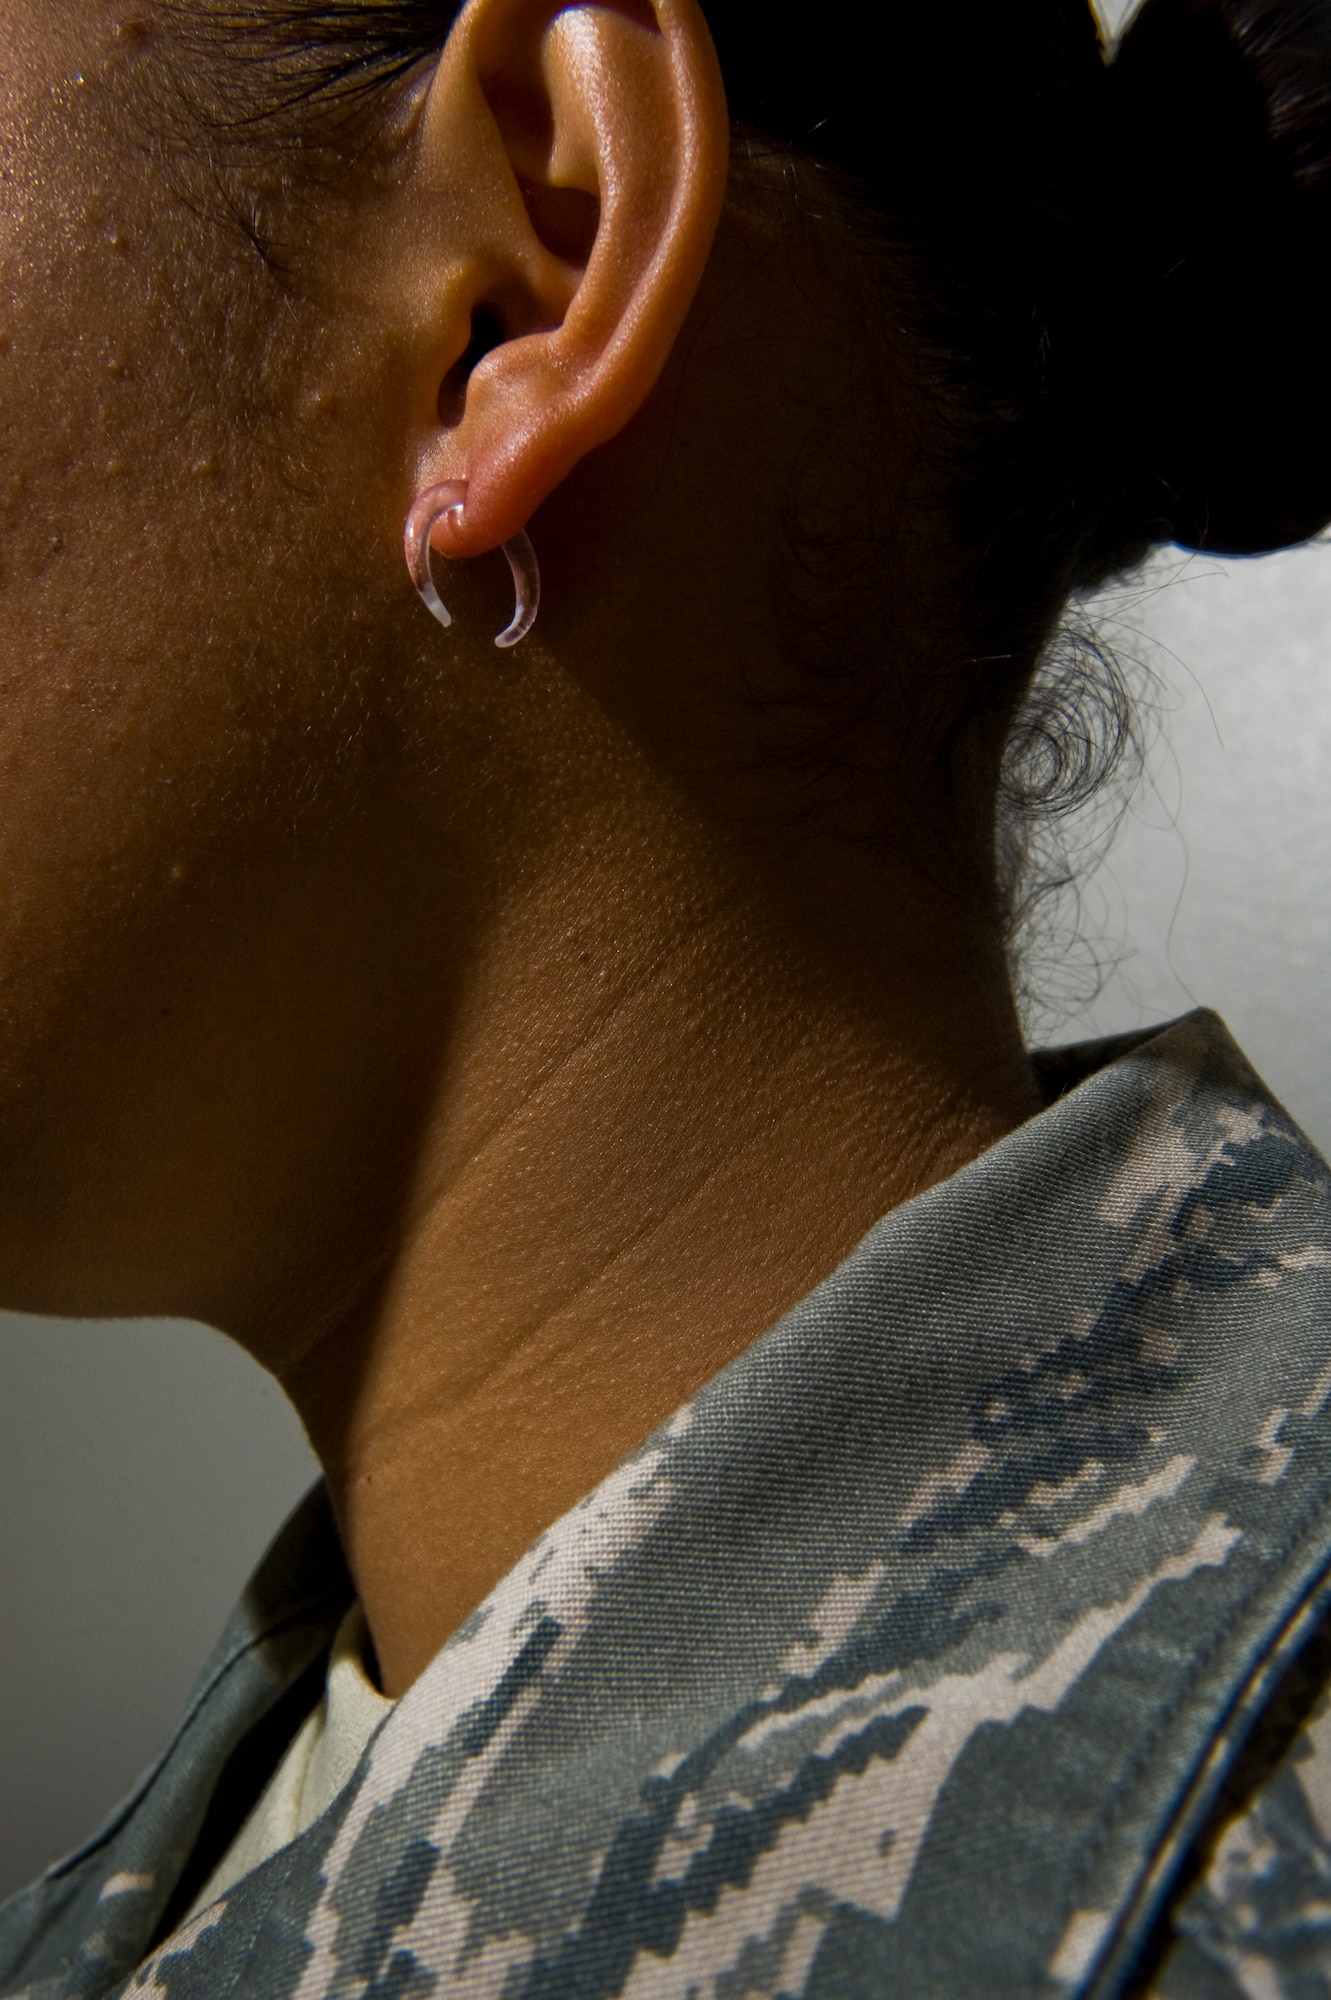 U.S. Air Force Airman wears unauthorized earrings to work Aug. 30, 2011, at Nellis Air Force Base, Nev. The new Air Force Instruction 36-2903, which was revised July 13, 2011, states Airmen may wear small (not exceeding 4mm in diameter) spherical, conservative (moderate, being within reasonable limits; not excessive or extreme) round white diamond, gold, white pearl, or silver earrings as a set with any uniform combination. (U.S. Air Force photo by Airman 1st Class Daniel Hughes/Released)
